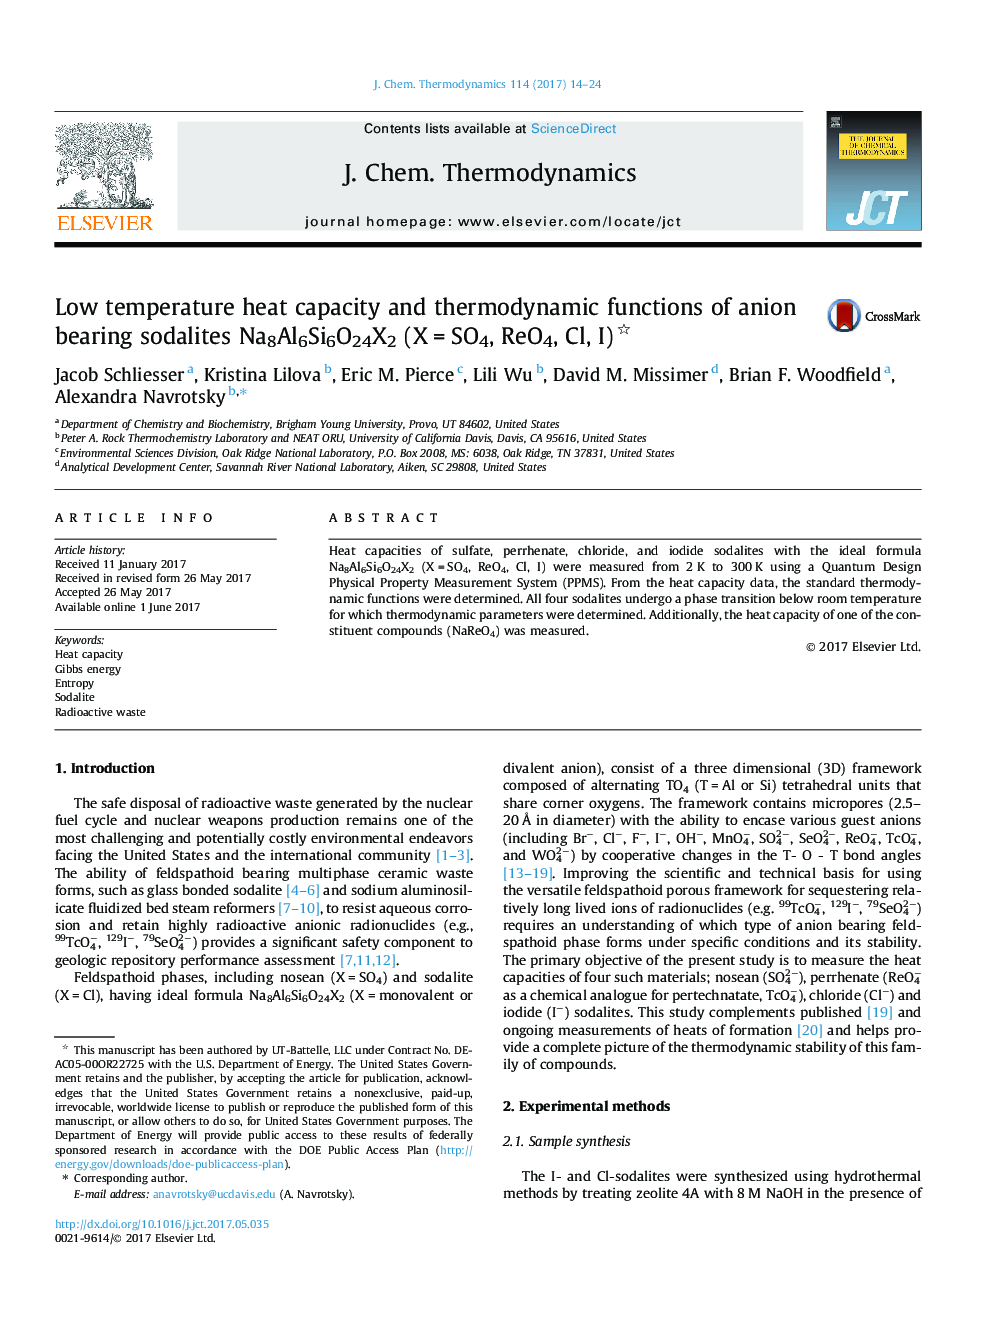 Low temperature heat capacity and thermodynamic functions of anion bearing sodalites Na8Al6Si6O24X2 (X = SO4, ReO4, Cl, I)